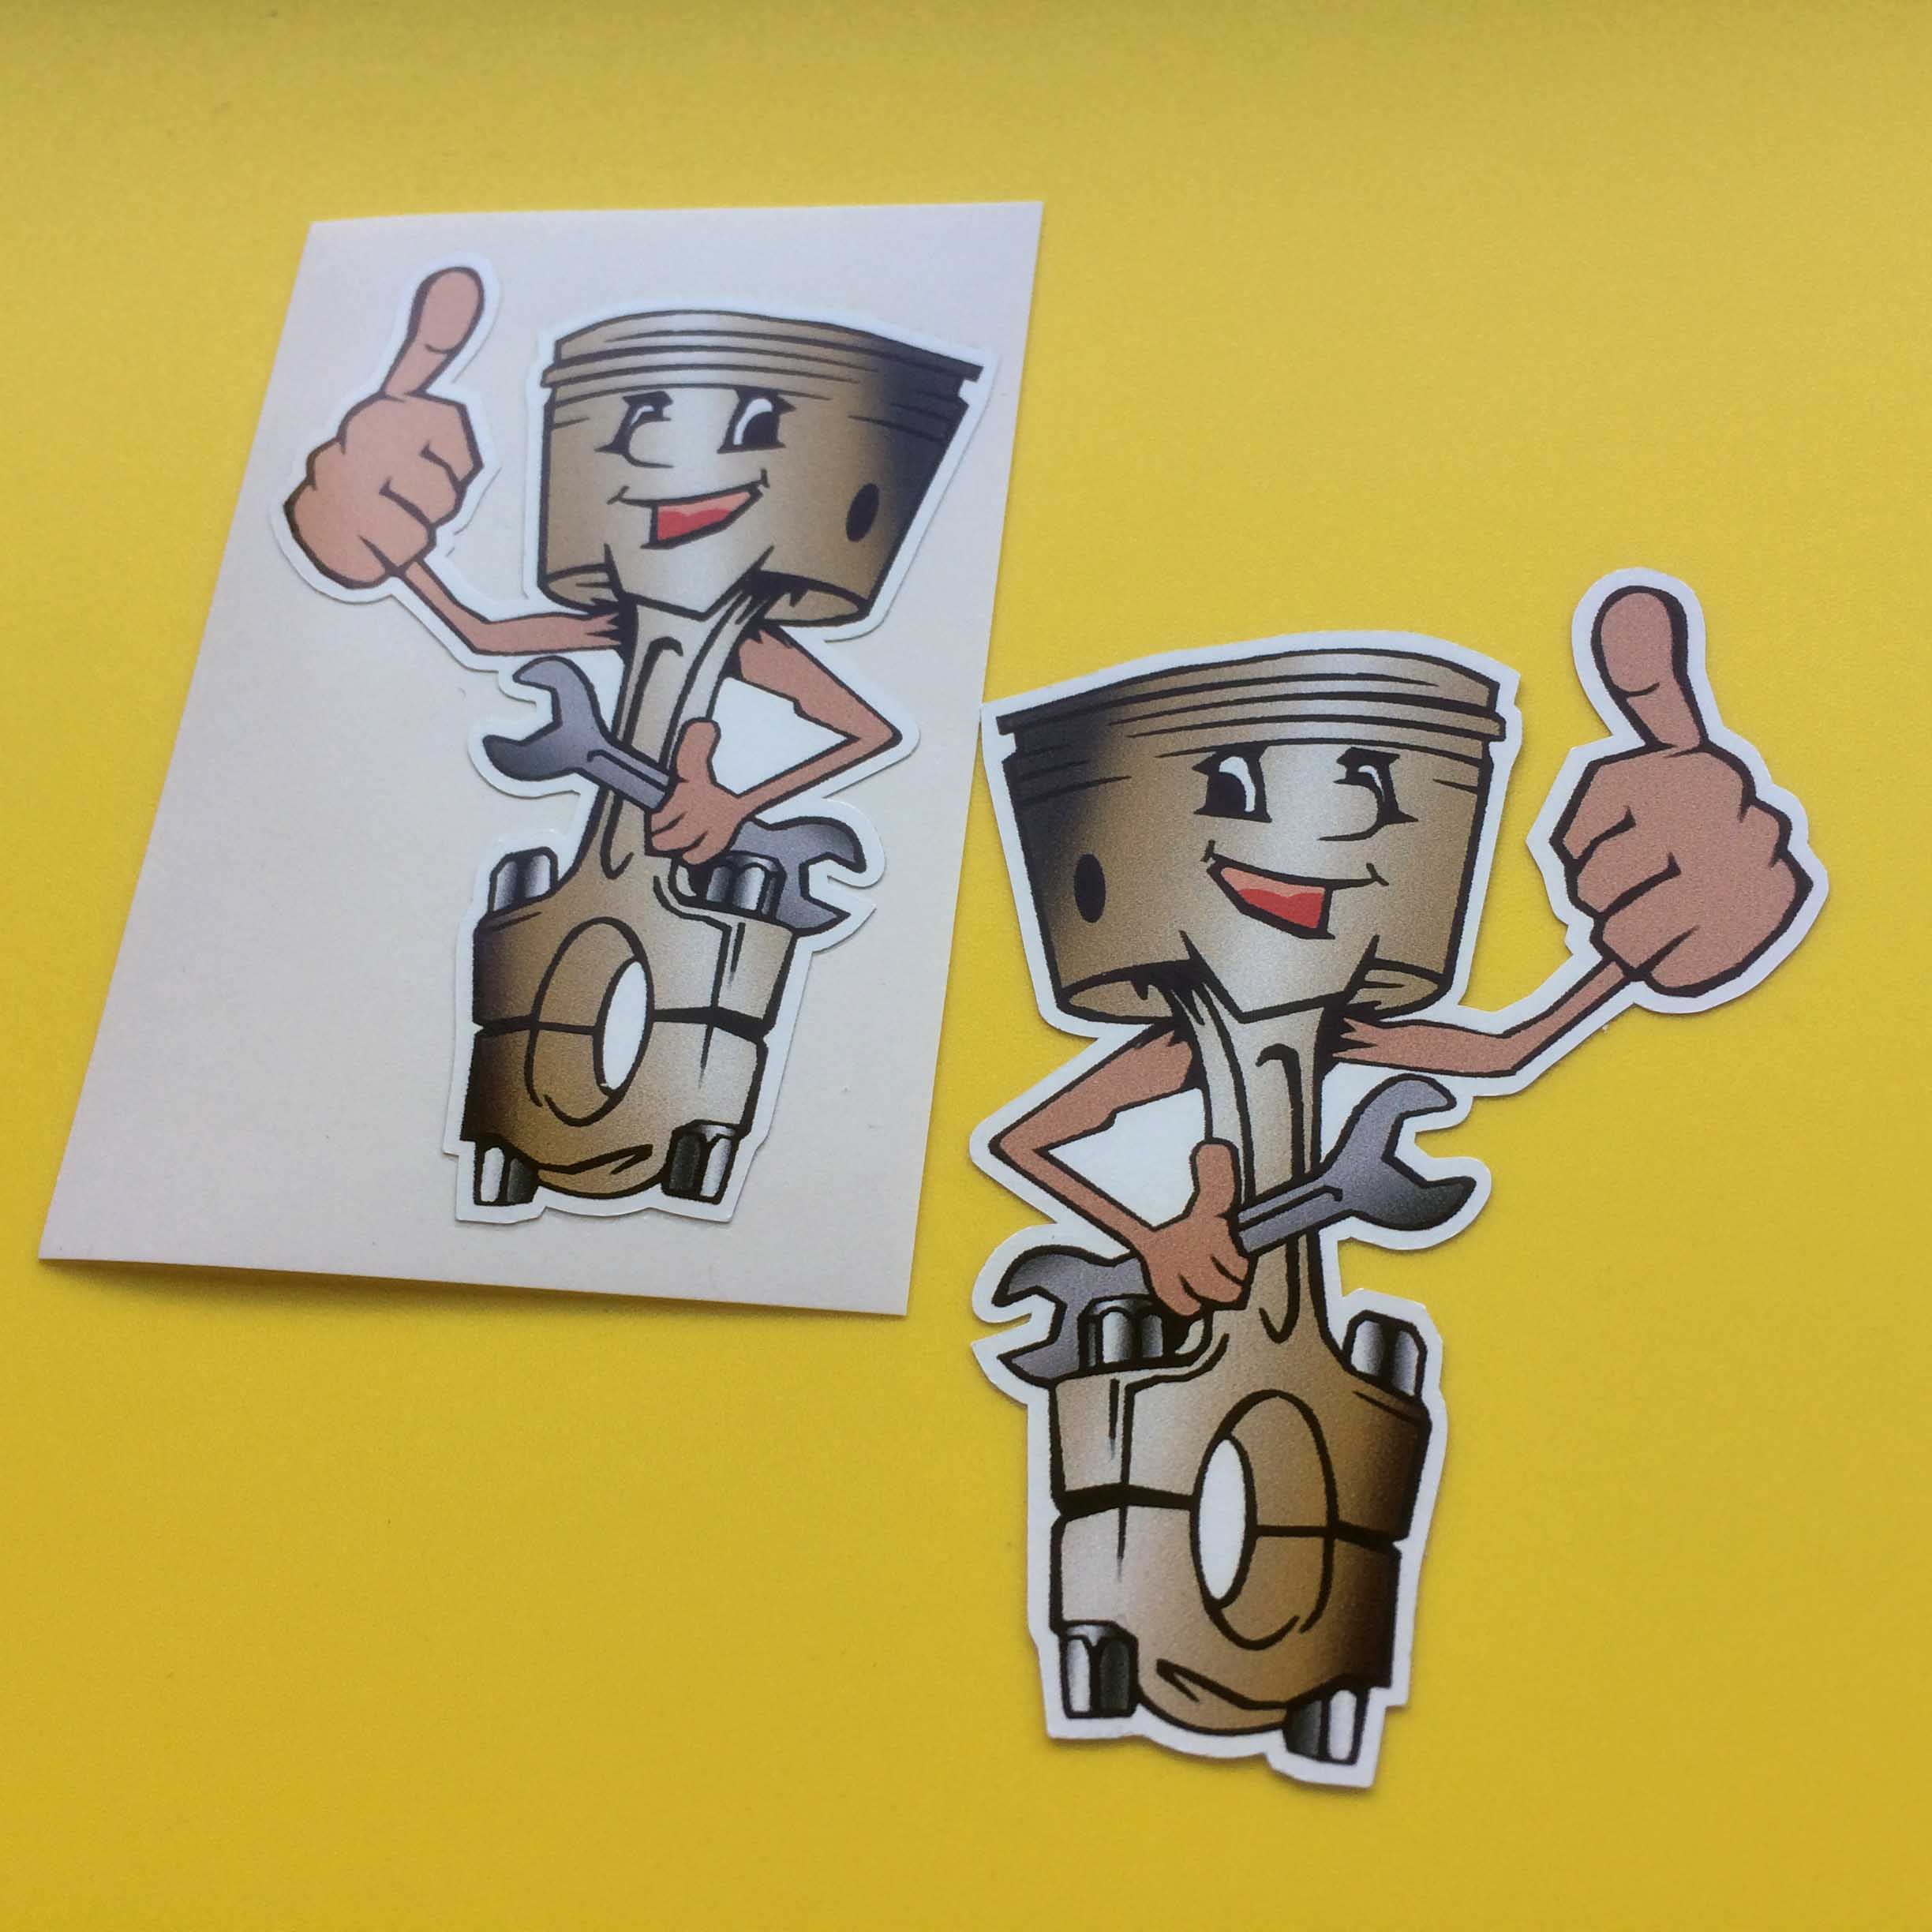 JOLLY HAPPY PISTONS STICKERS. A cartoon image of a piston with a smiling face holding a spanner in one hand and giving the thumbs up with the other.